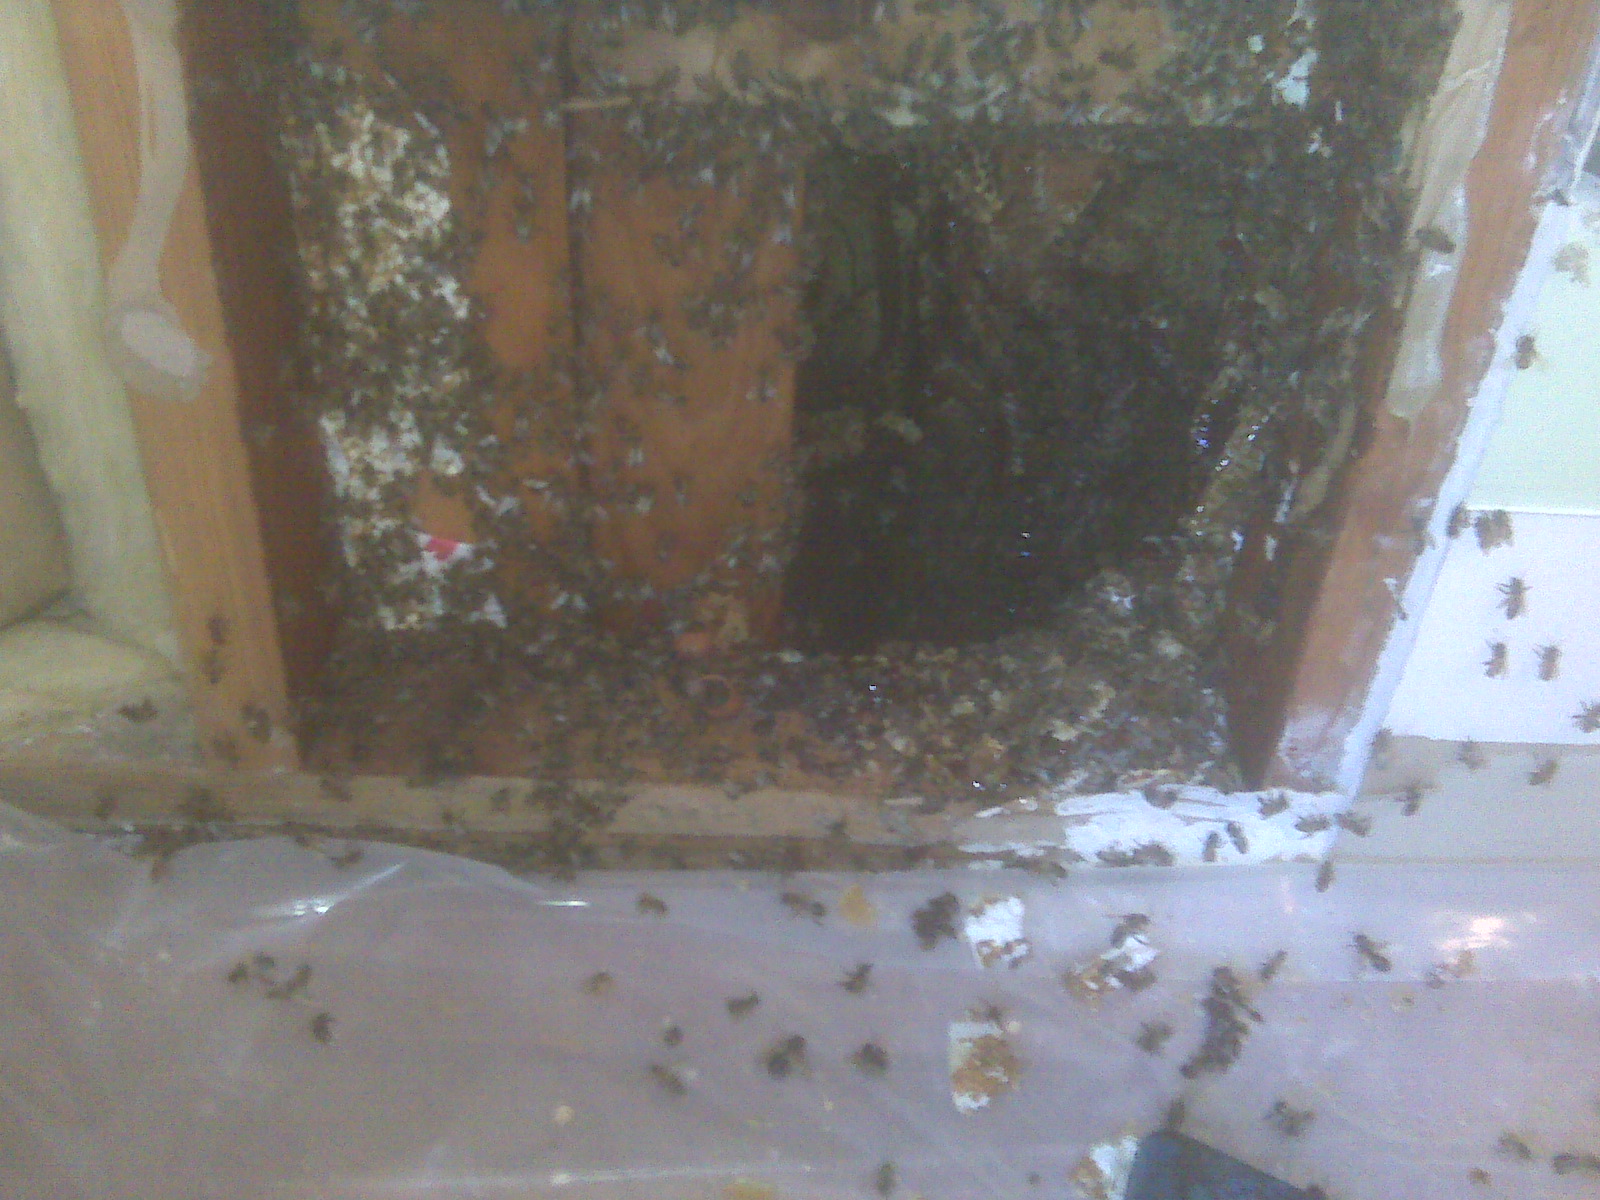 spent hours reaching in this hole dragging out angry bees